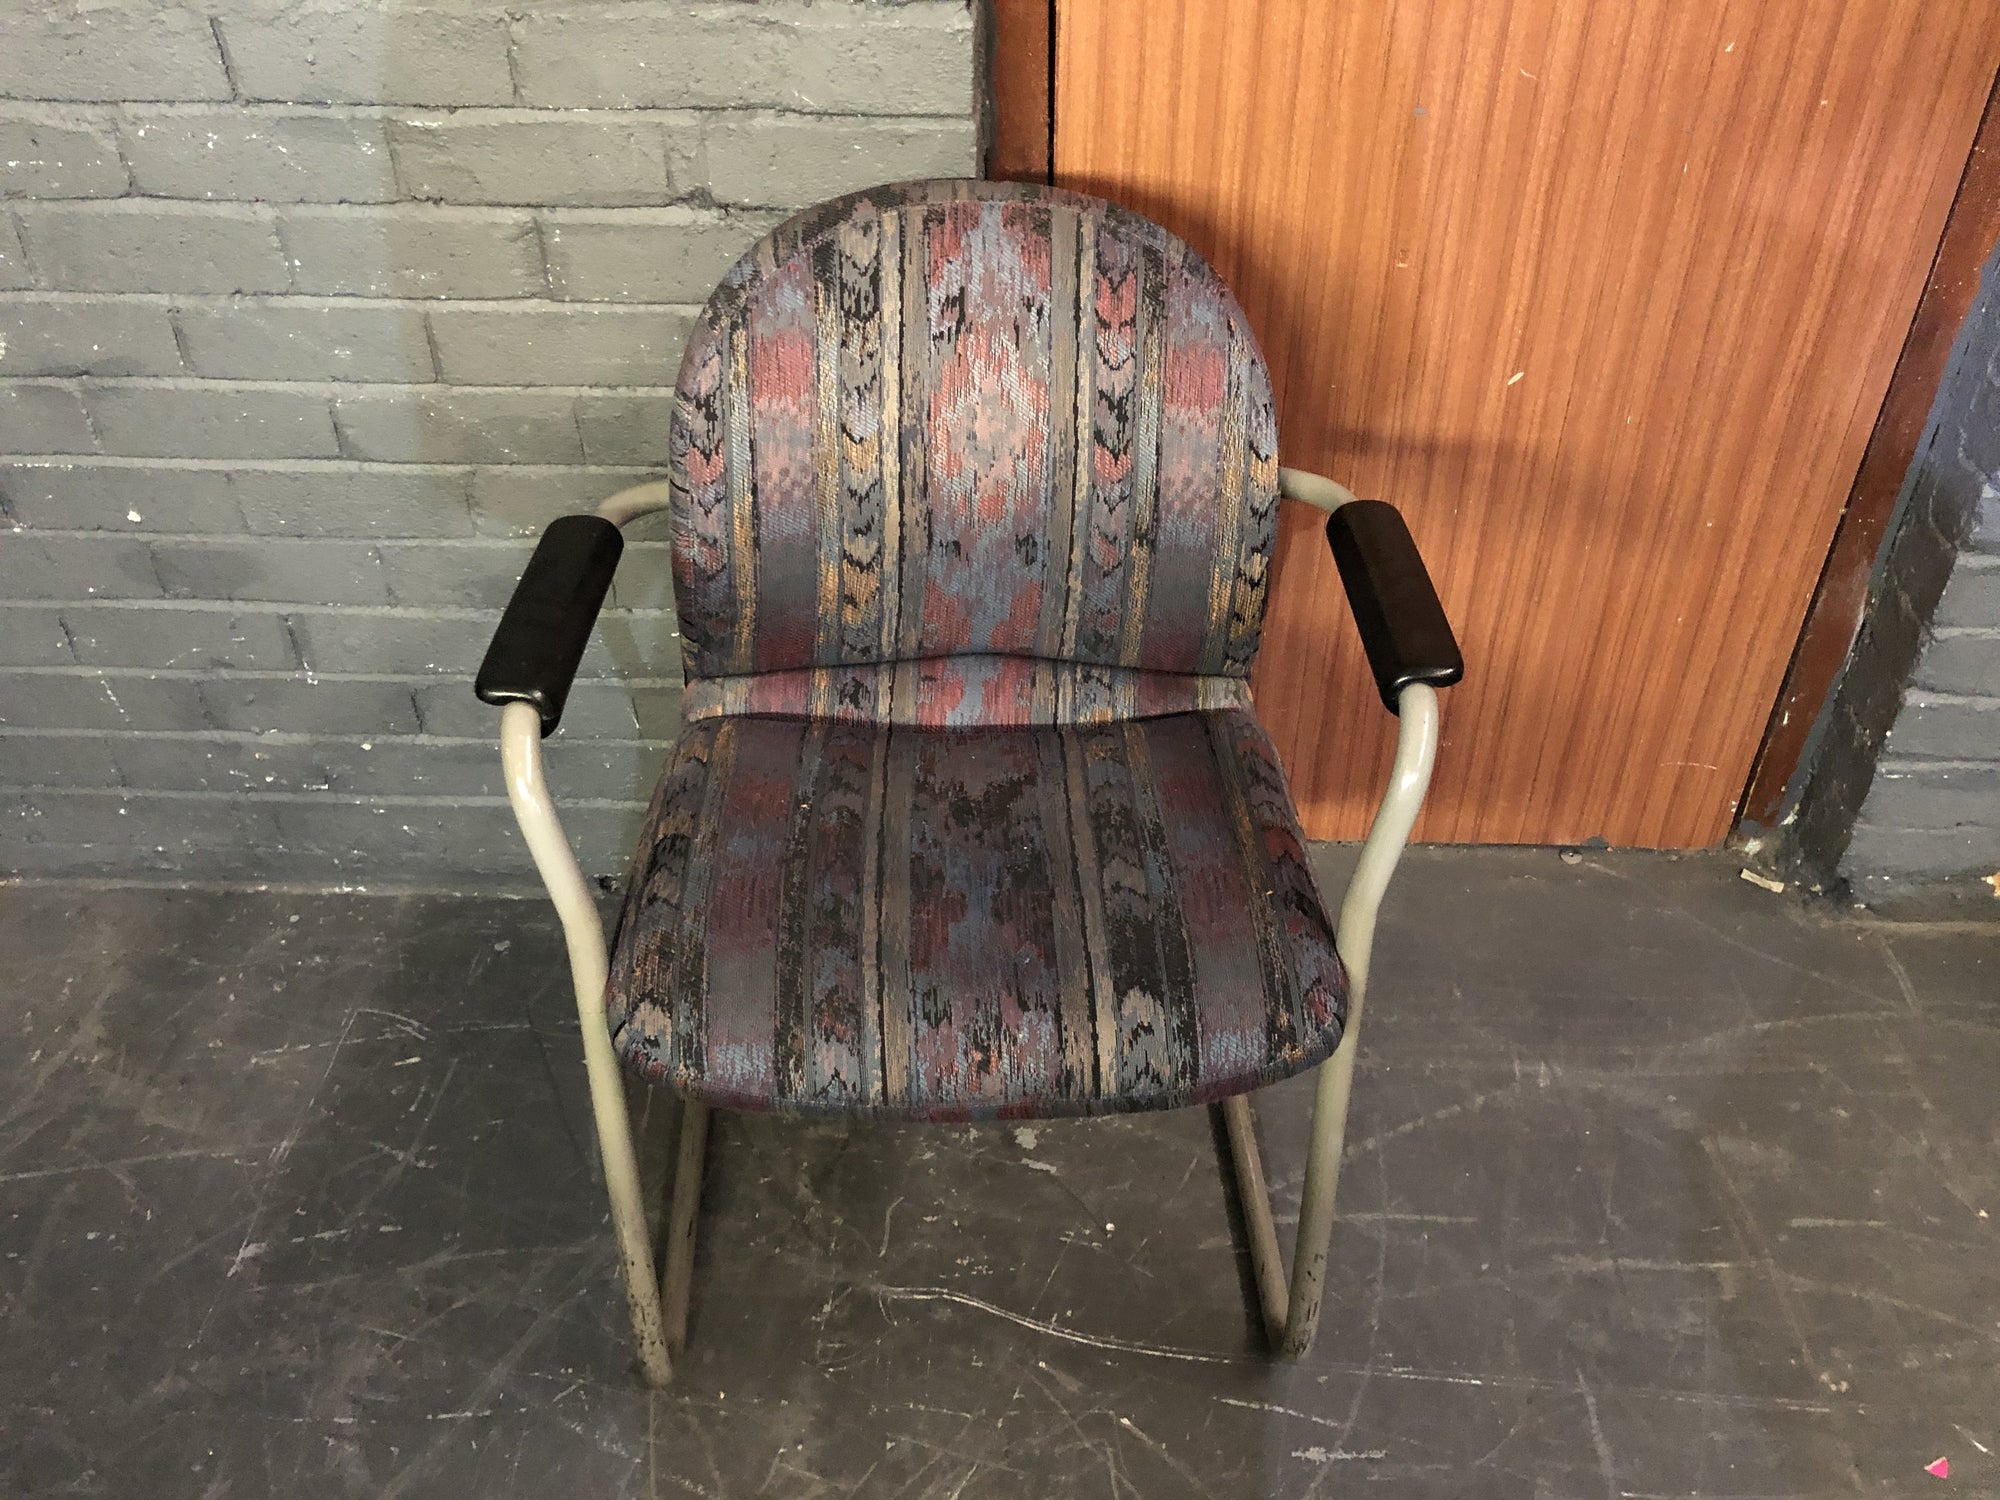 Purple Patterned visitors chair - 2ndhandwarehouse.com